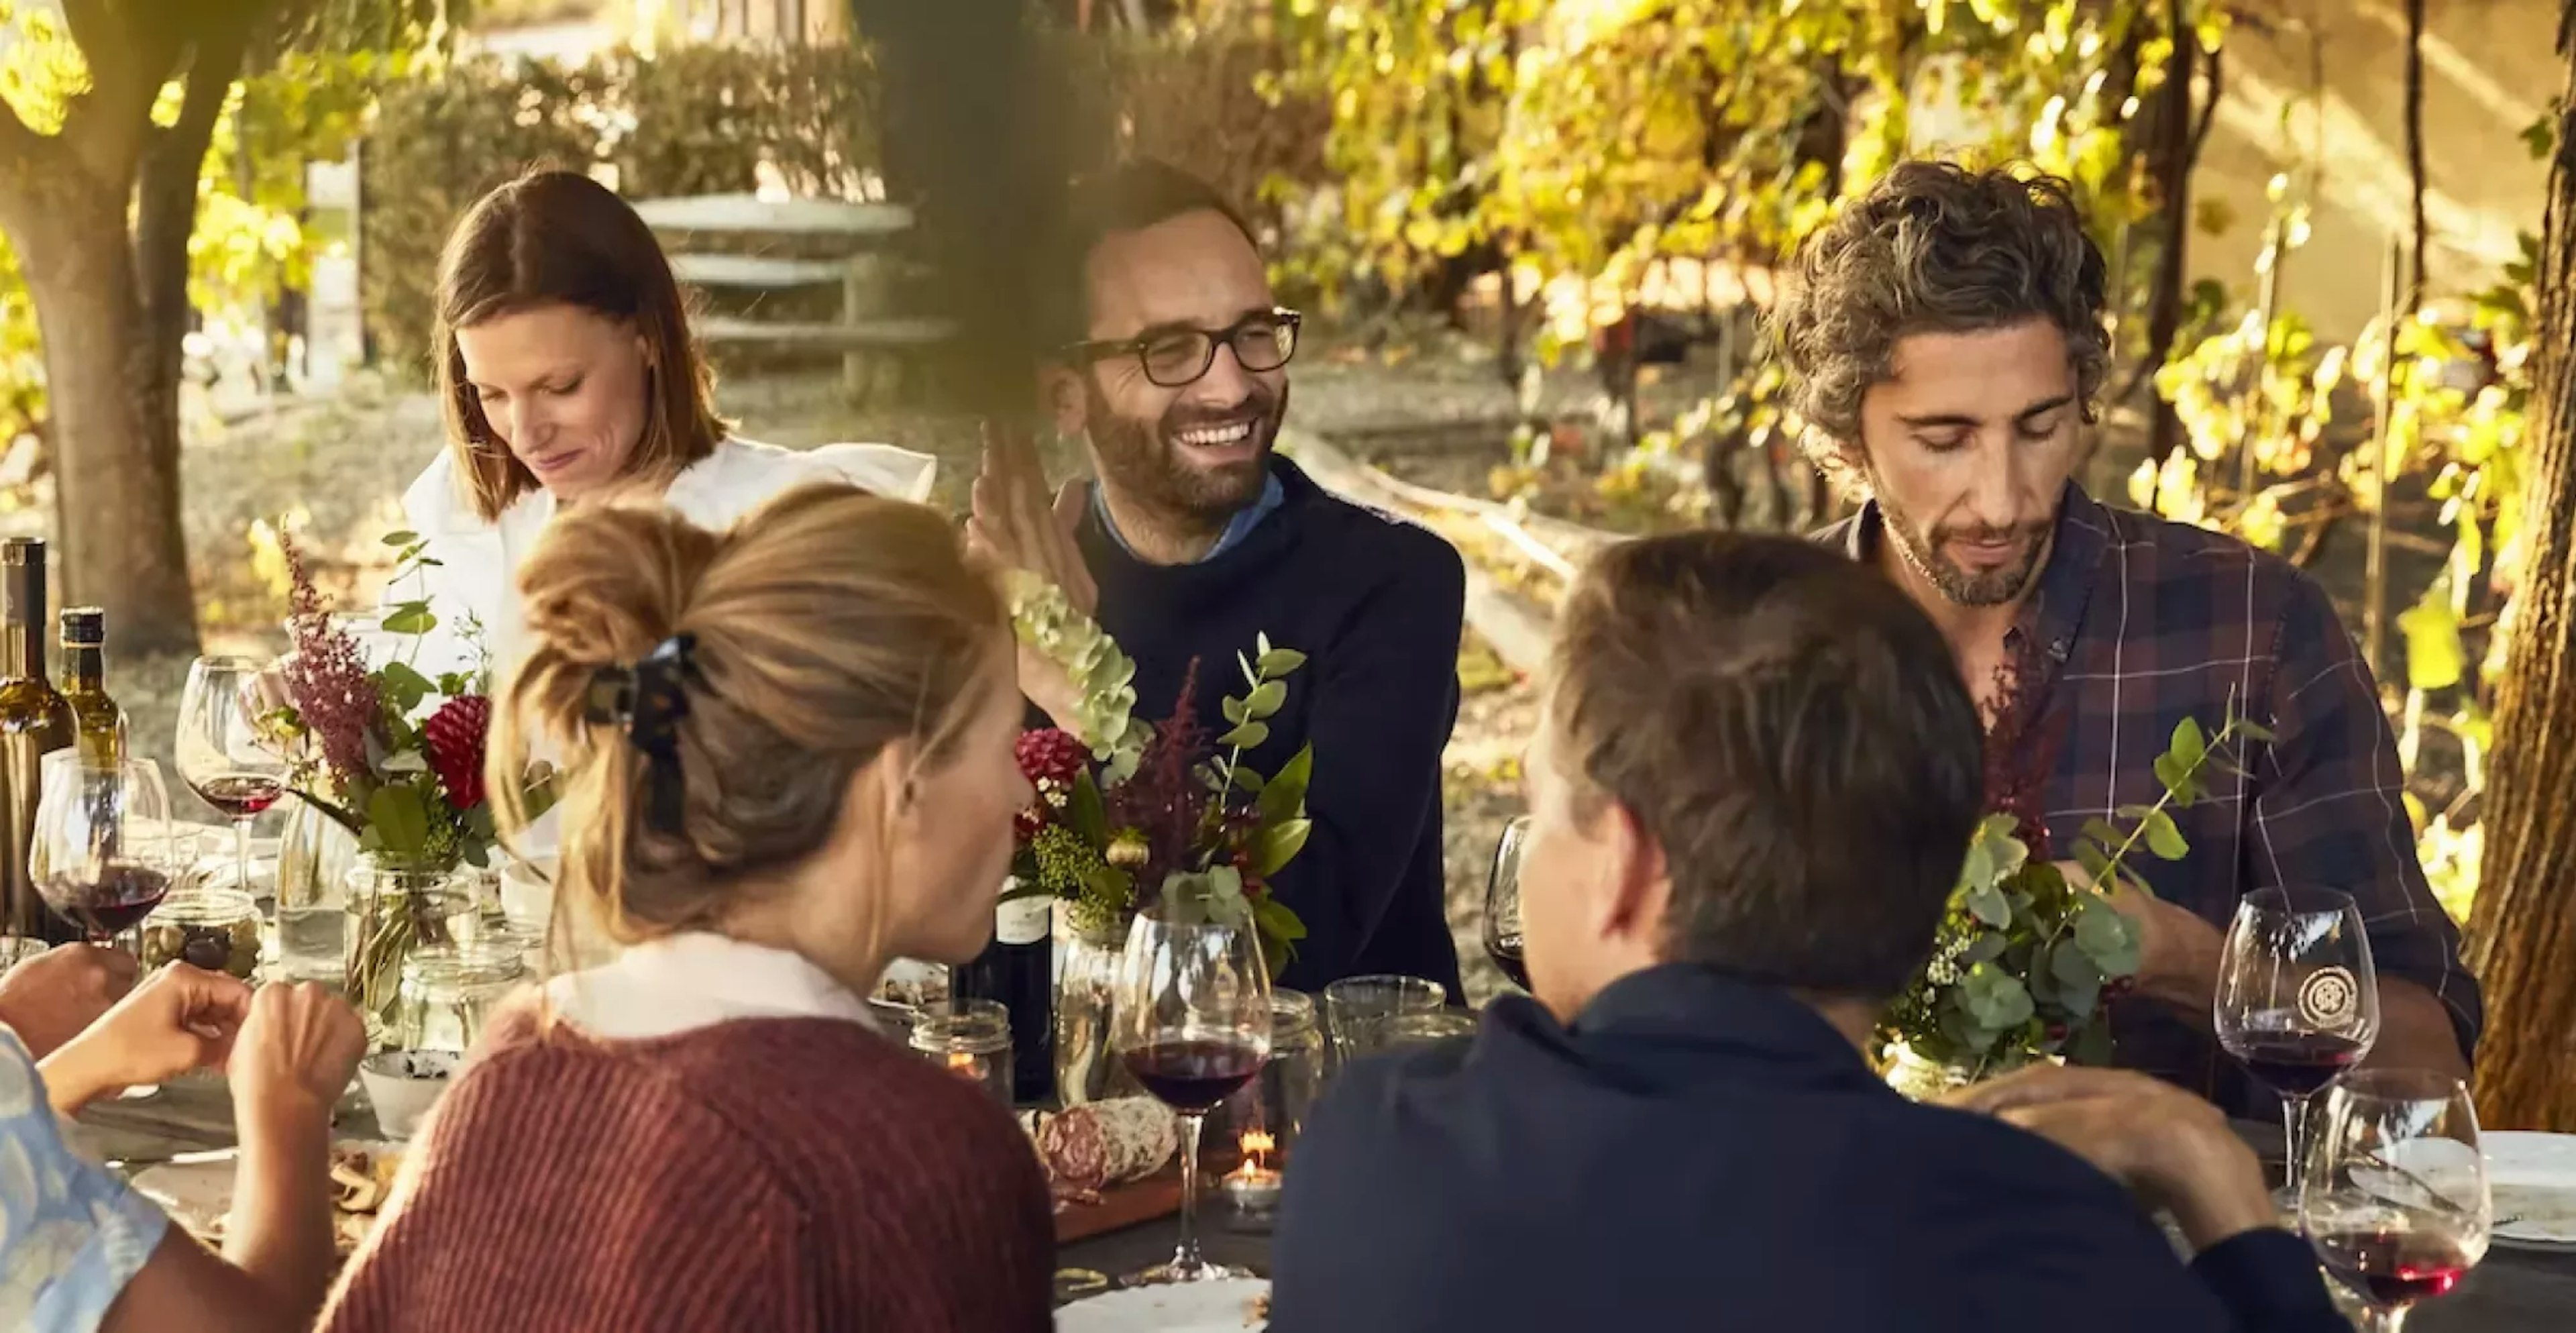 Group of people sharing a meal outdoors